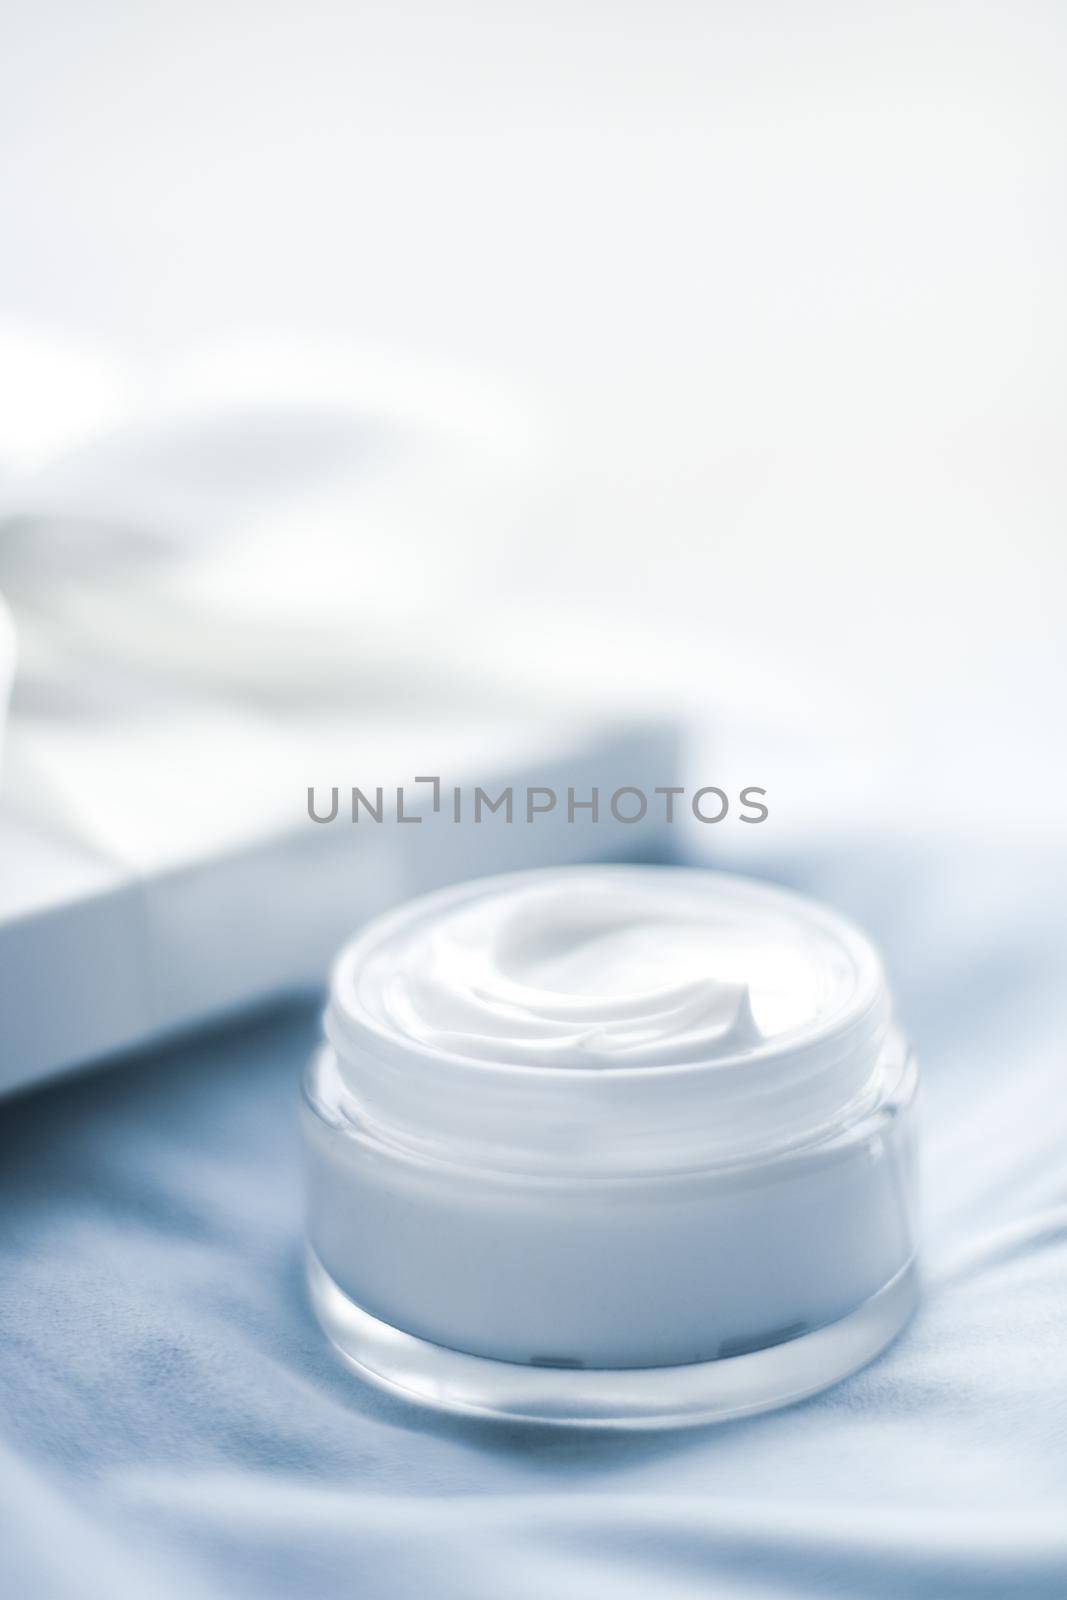 Luxury face cream jar and white gift box by Anneleven